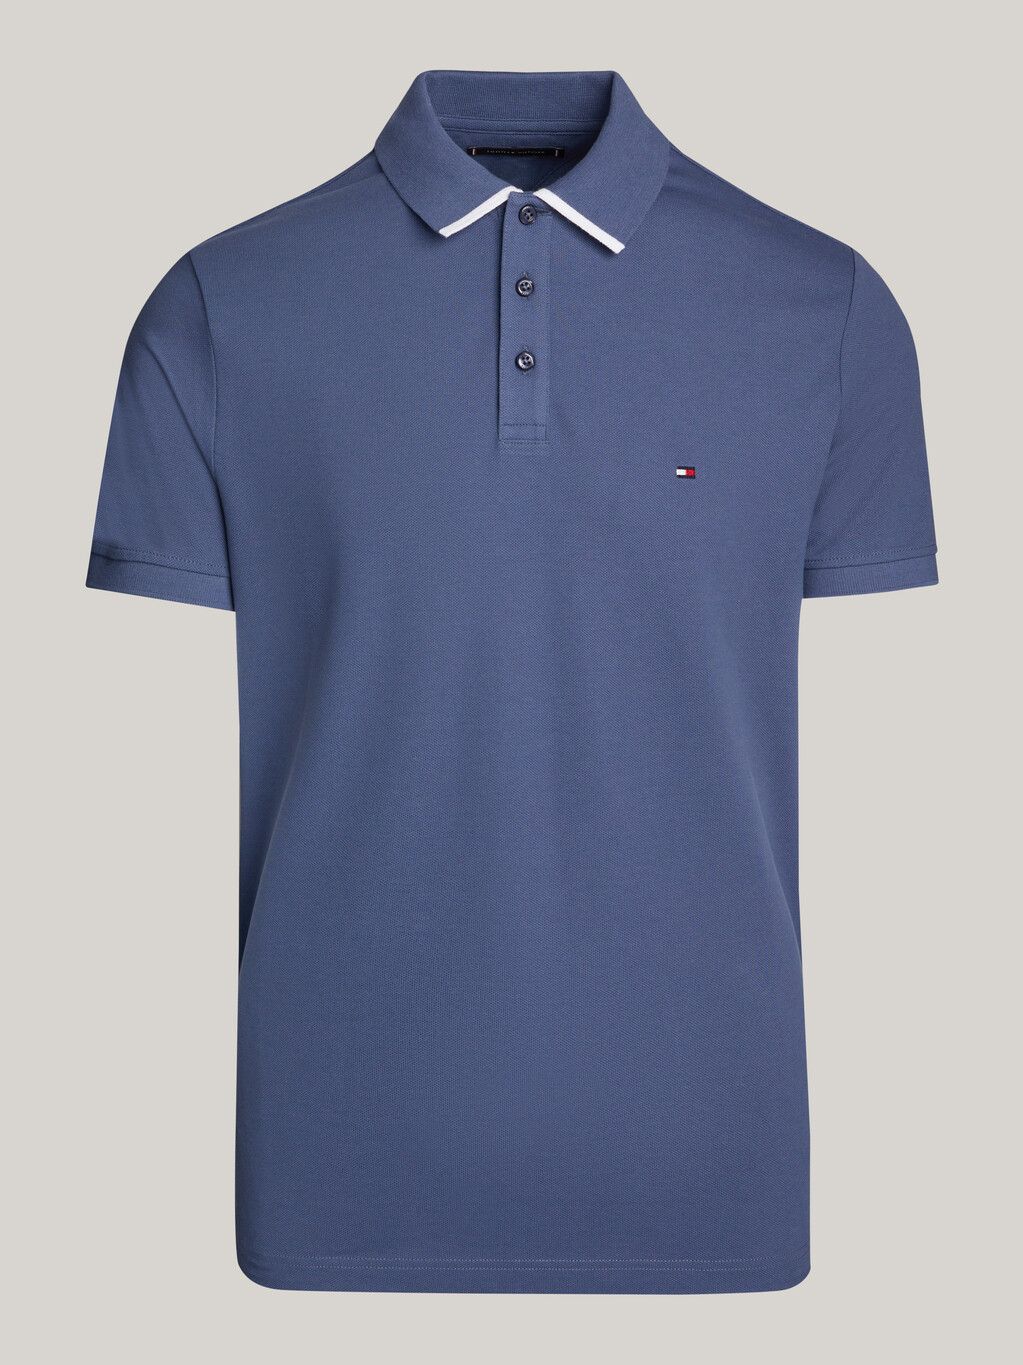 Hilfiger Monotype Tipped Regular Fit Polo, Faded Indigo, hi-res